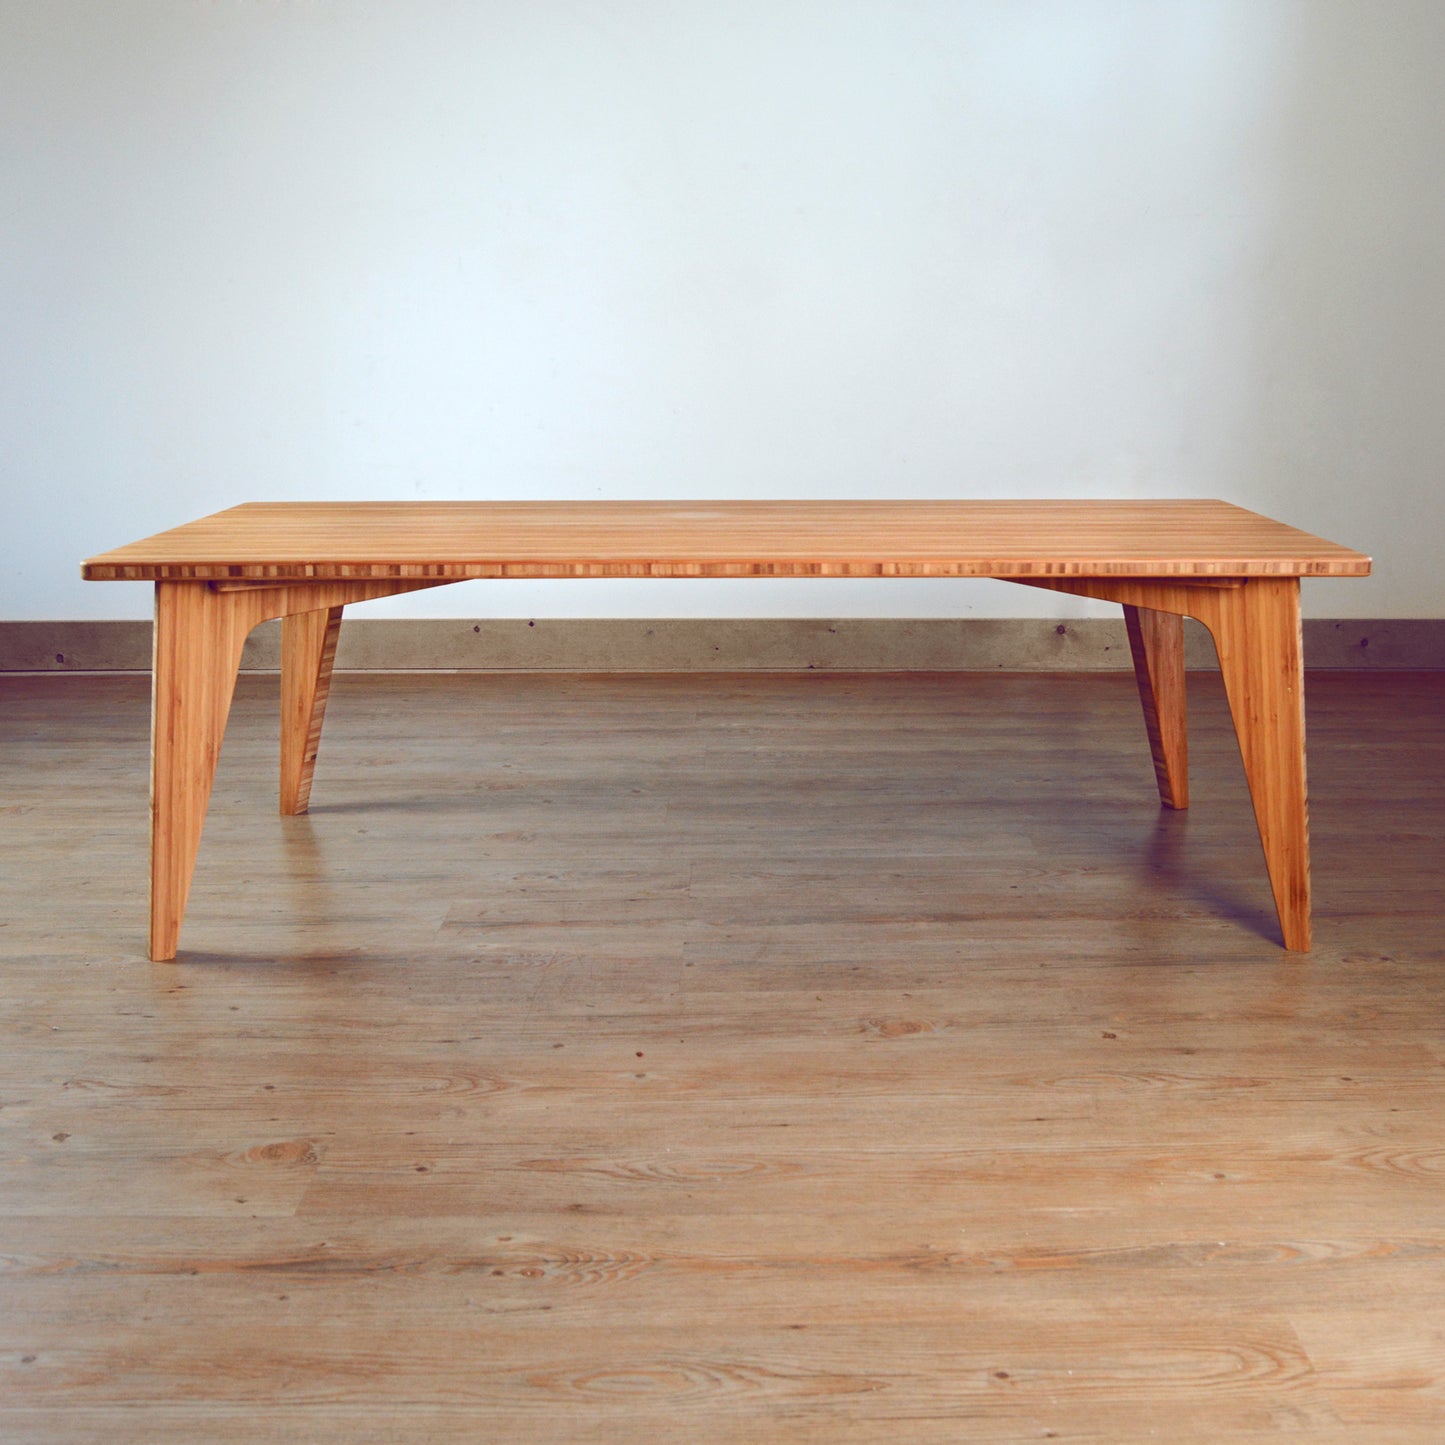 Natural bamboo table. Japanese, mid-century, Scandinavian and contemporary inspired. Sustainable wood alternative, made from solid grass.